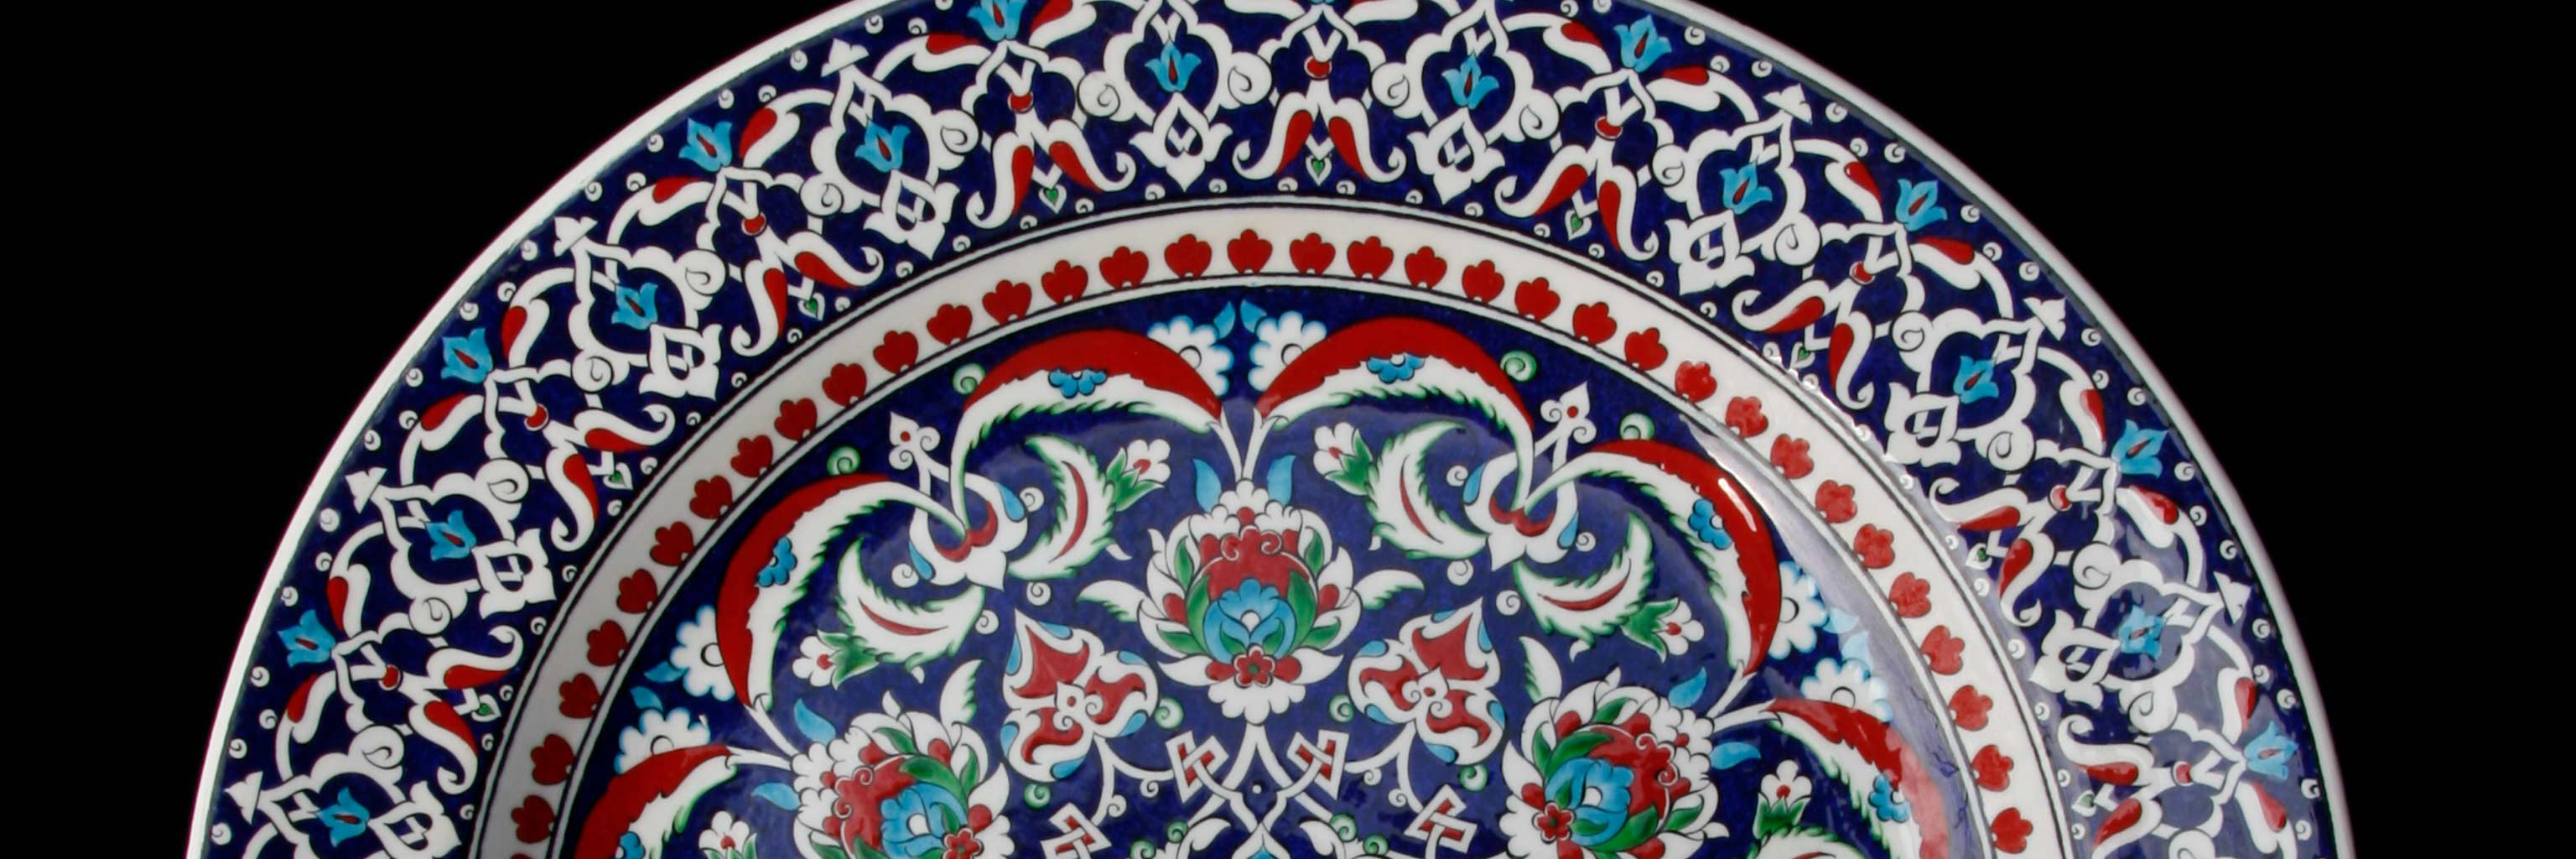 Close-up of plate art.